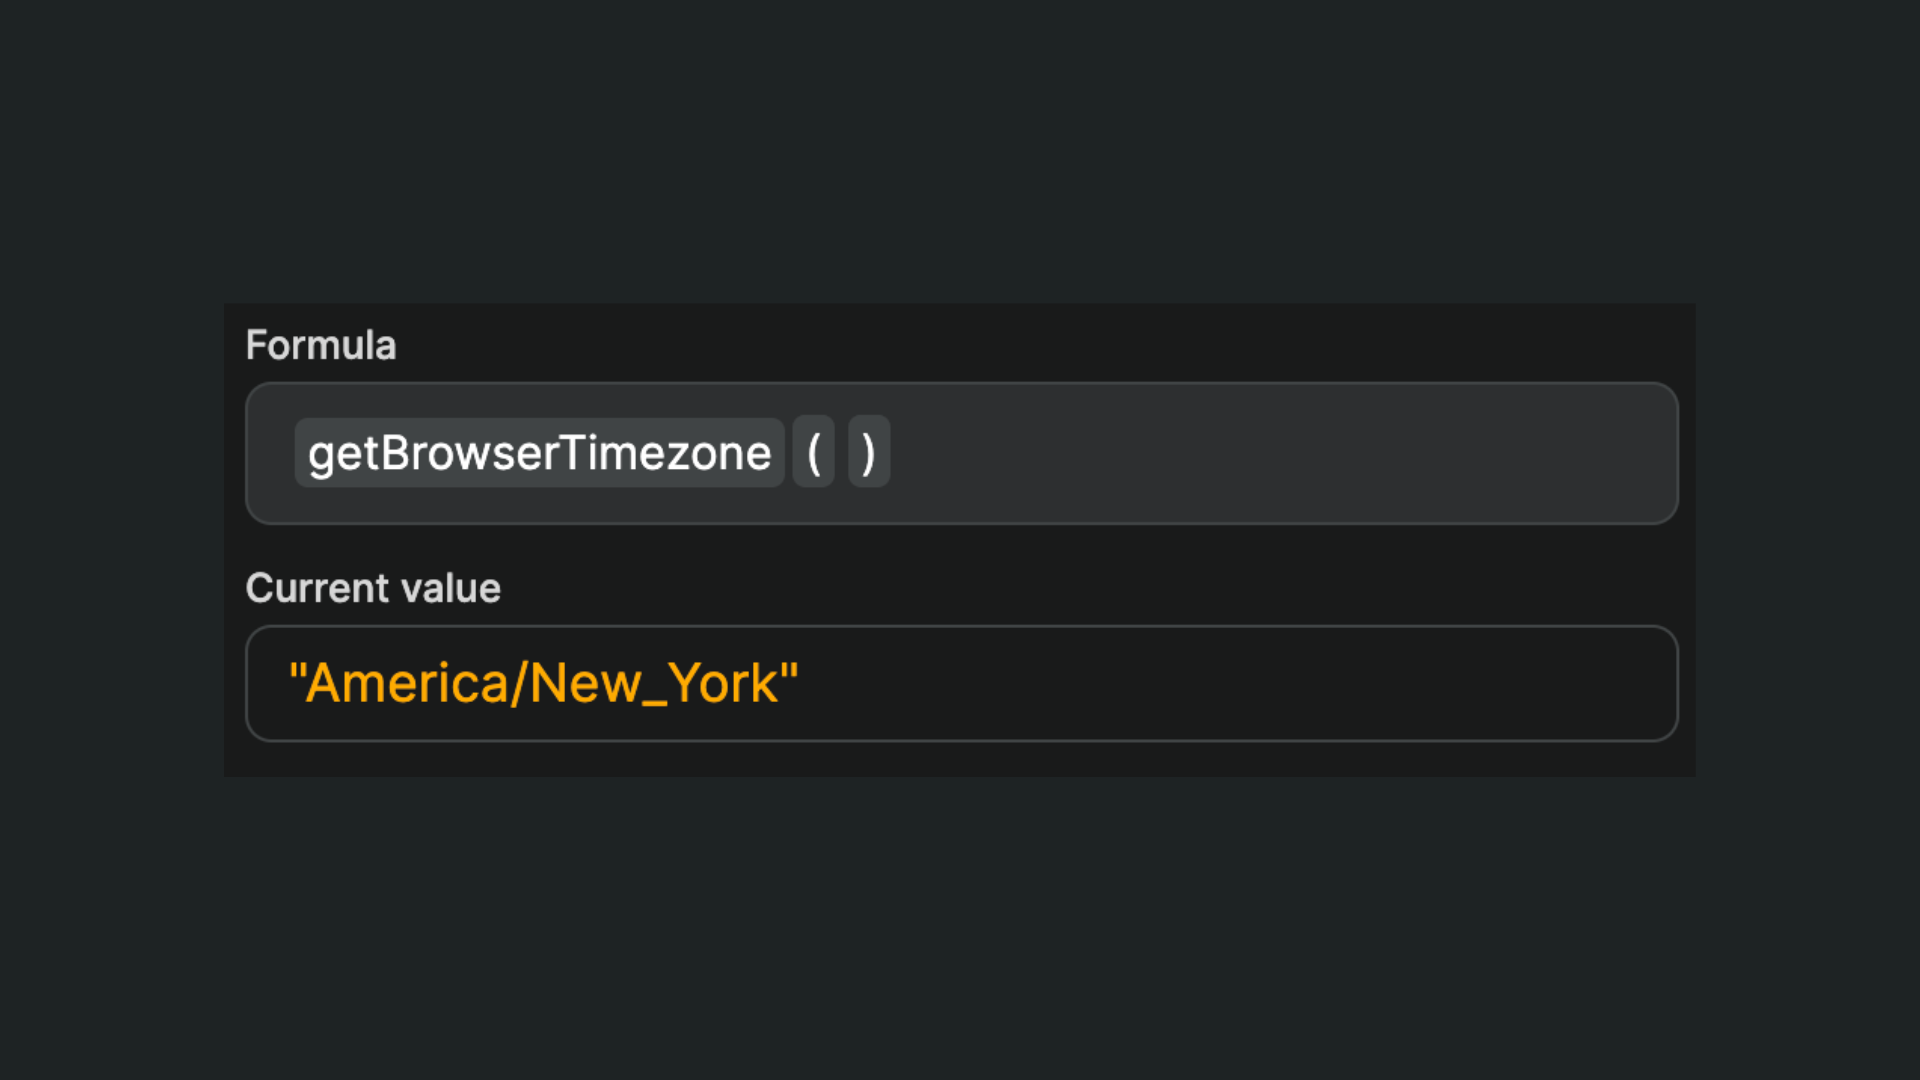 Get user's browser timezone